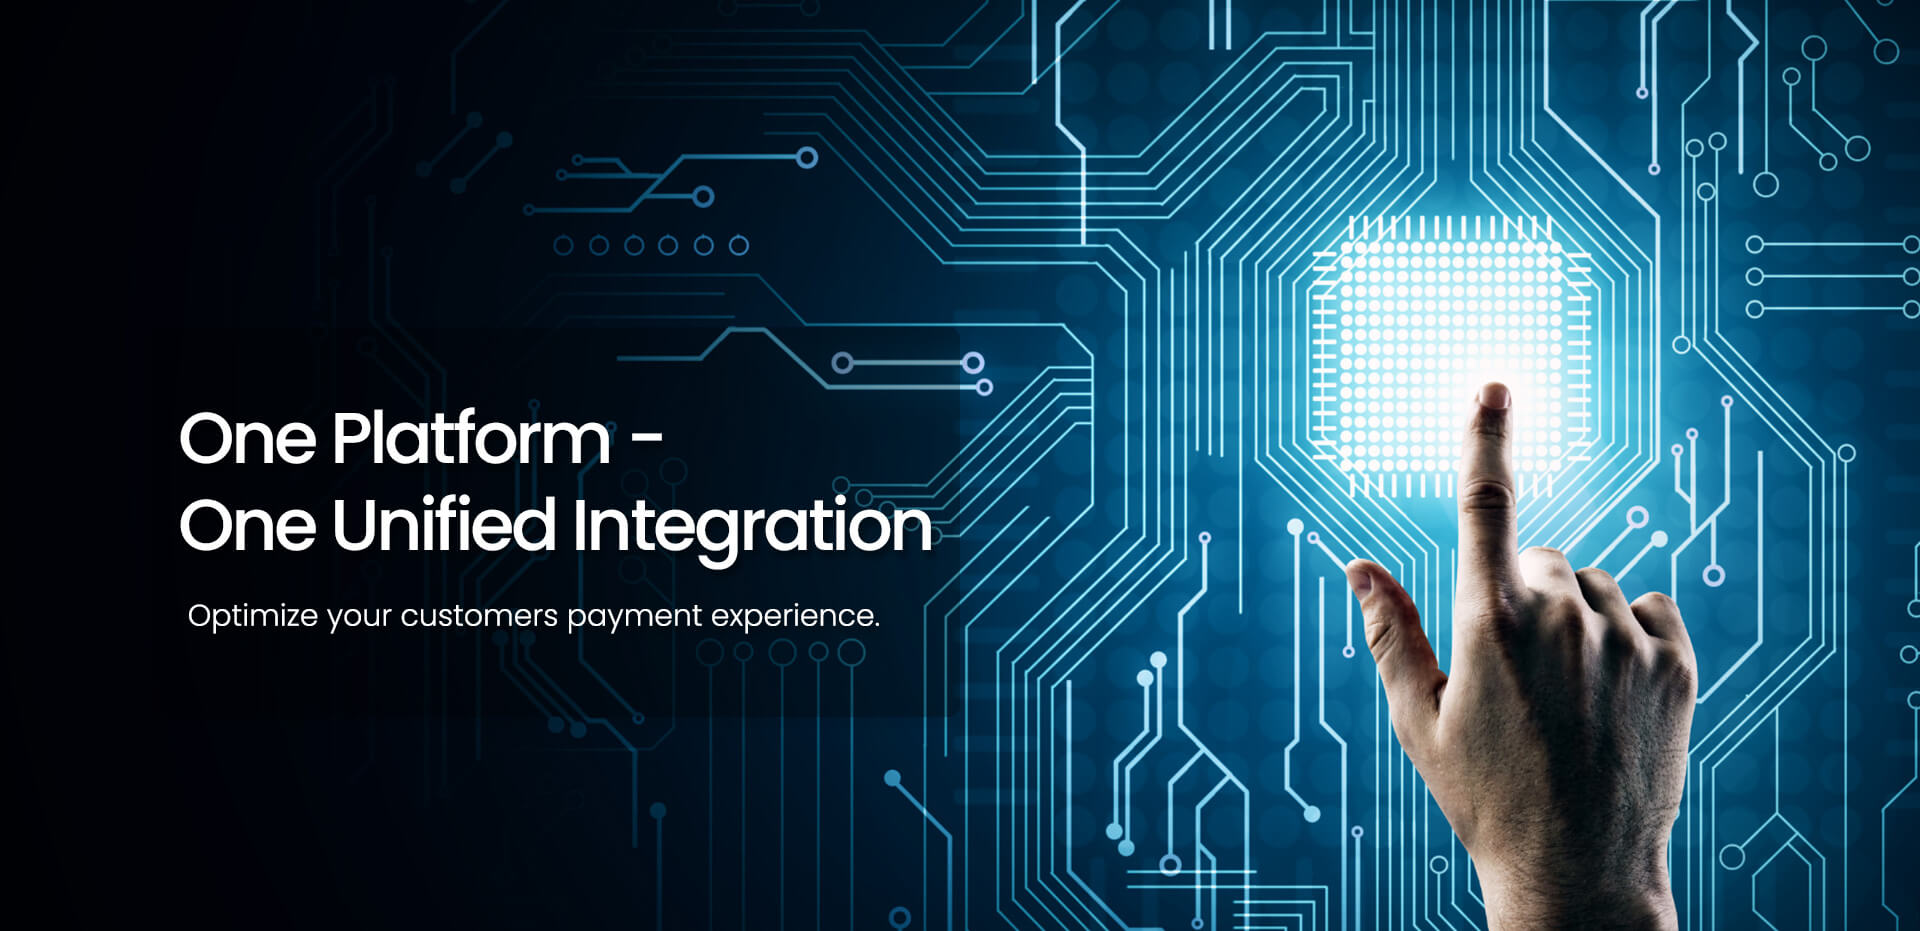 One Platform - One Unified Integration